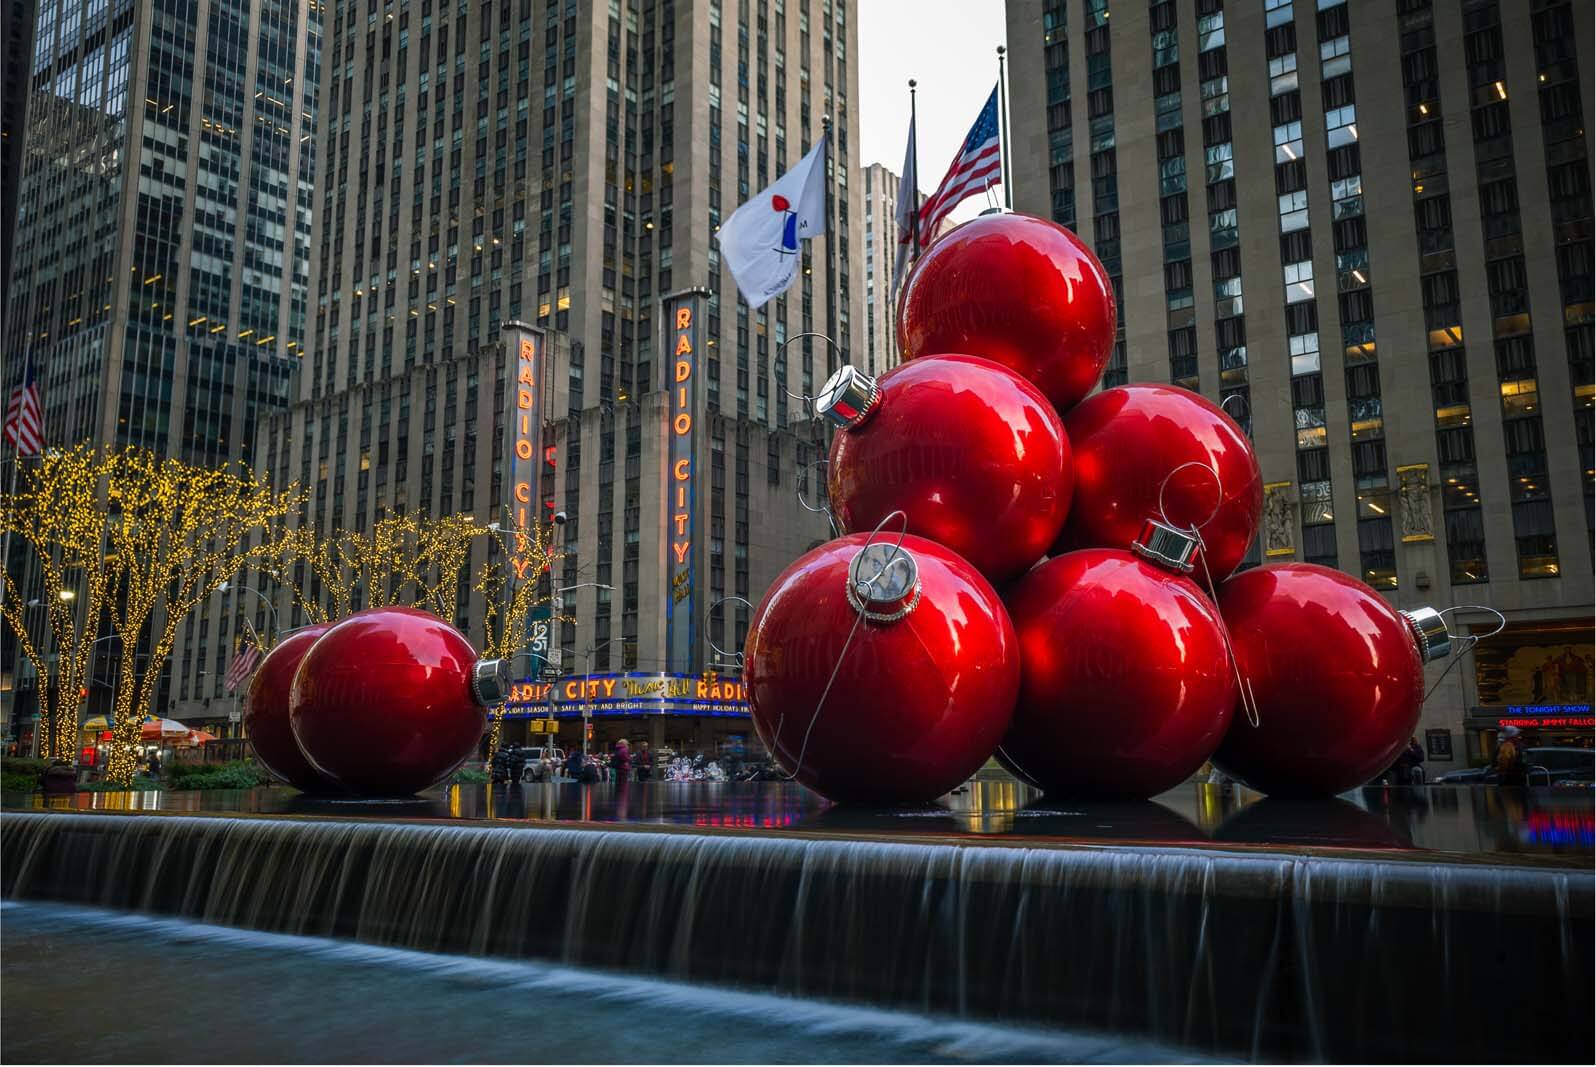 Giant Christmas ornaments on 6th avenue and radio city music hall at christmas in nyc